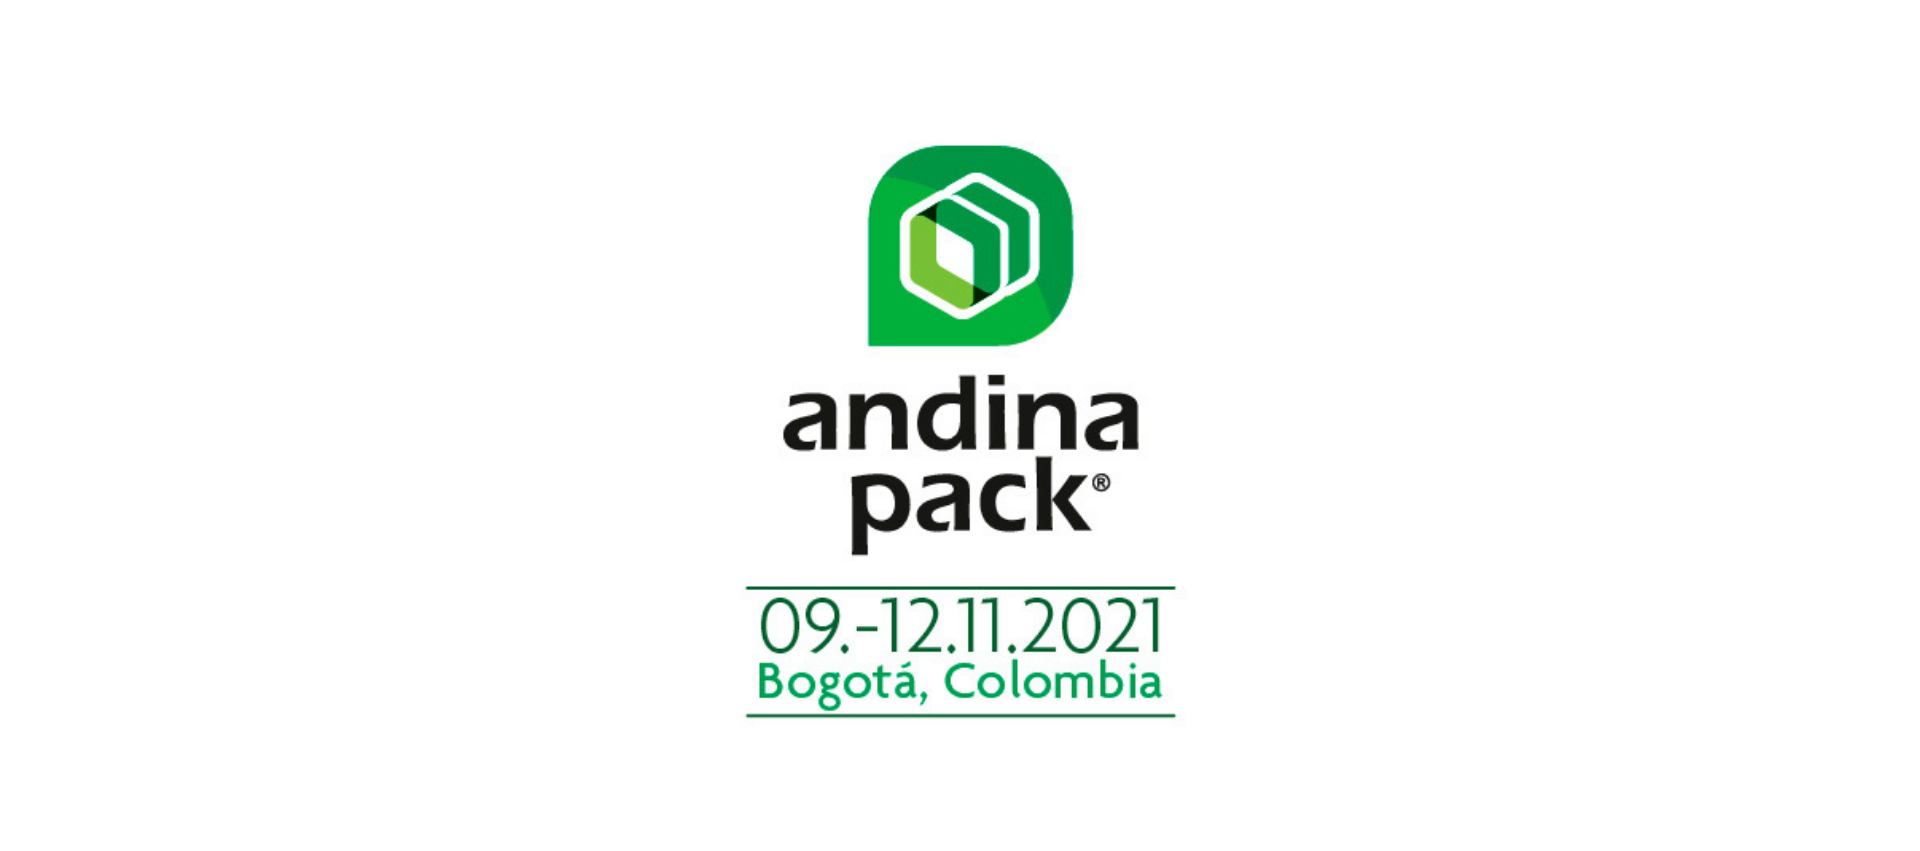 Banner of the Andina Pack 2021 trade show will be held on Novembre 9th to 10th, 2021 in Bogotá, Colombia. 